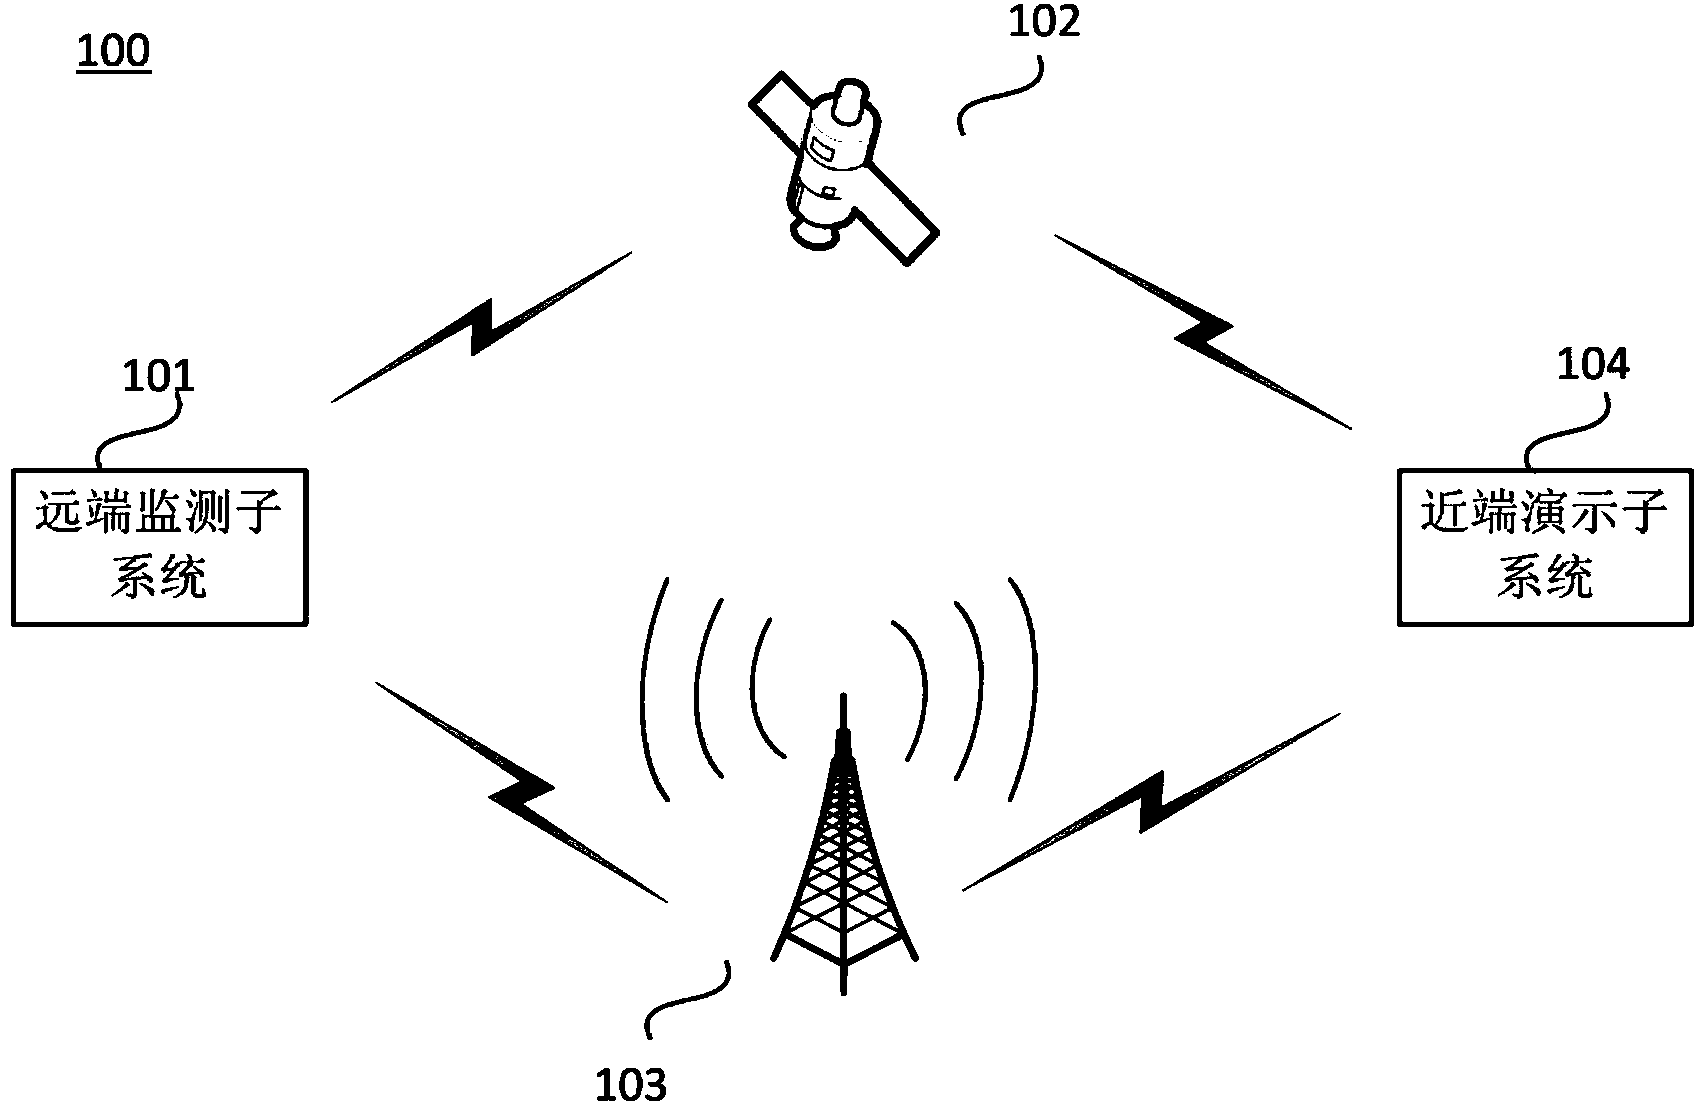 Water and sand remote monitoring system and method based on double-link communication